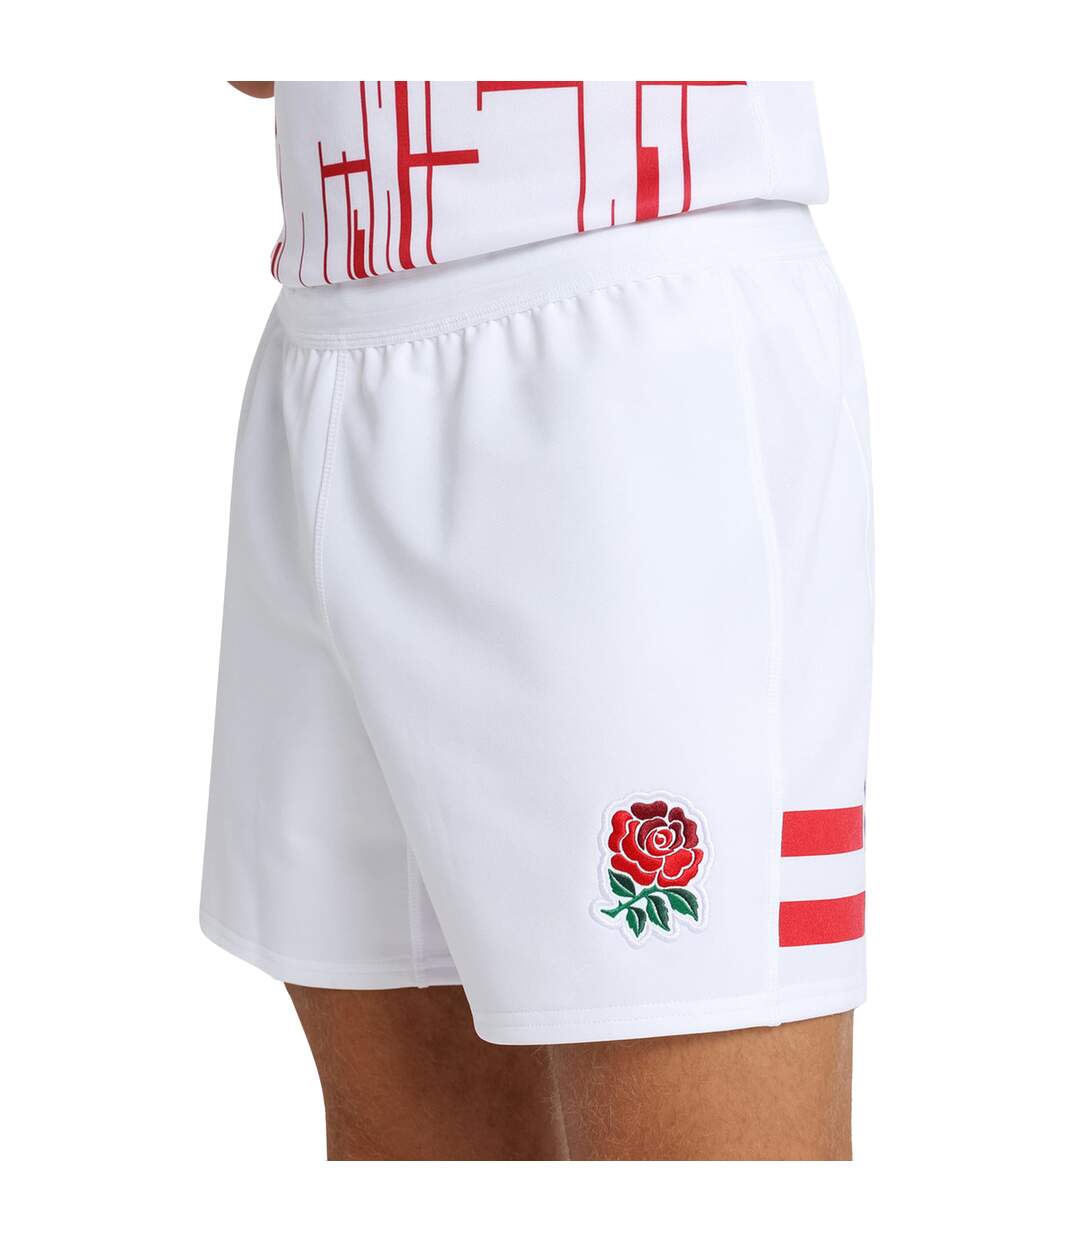 England Rugby - Short domicile 22/23 PRO - Homme (Blanc) - UTUO511